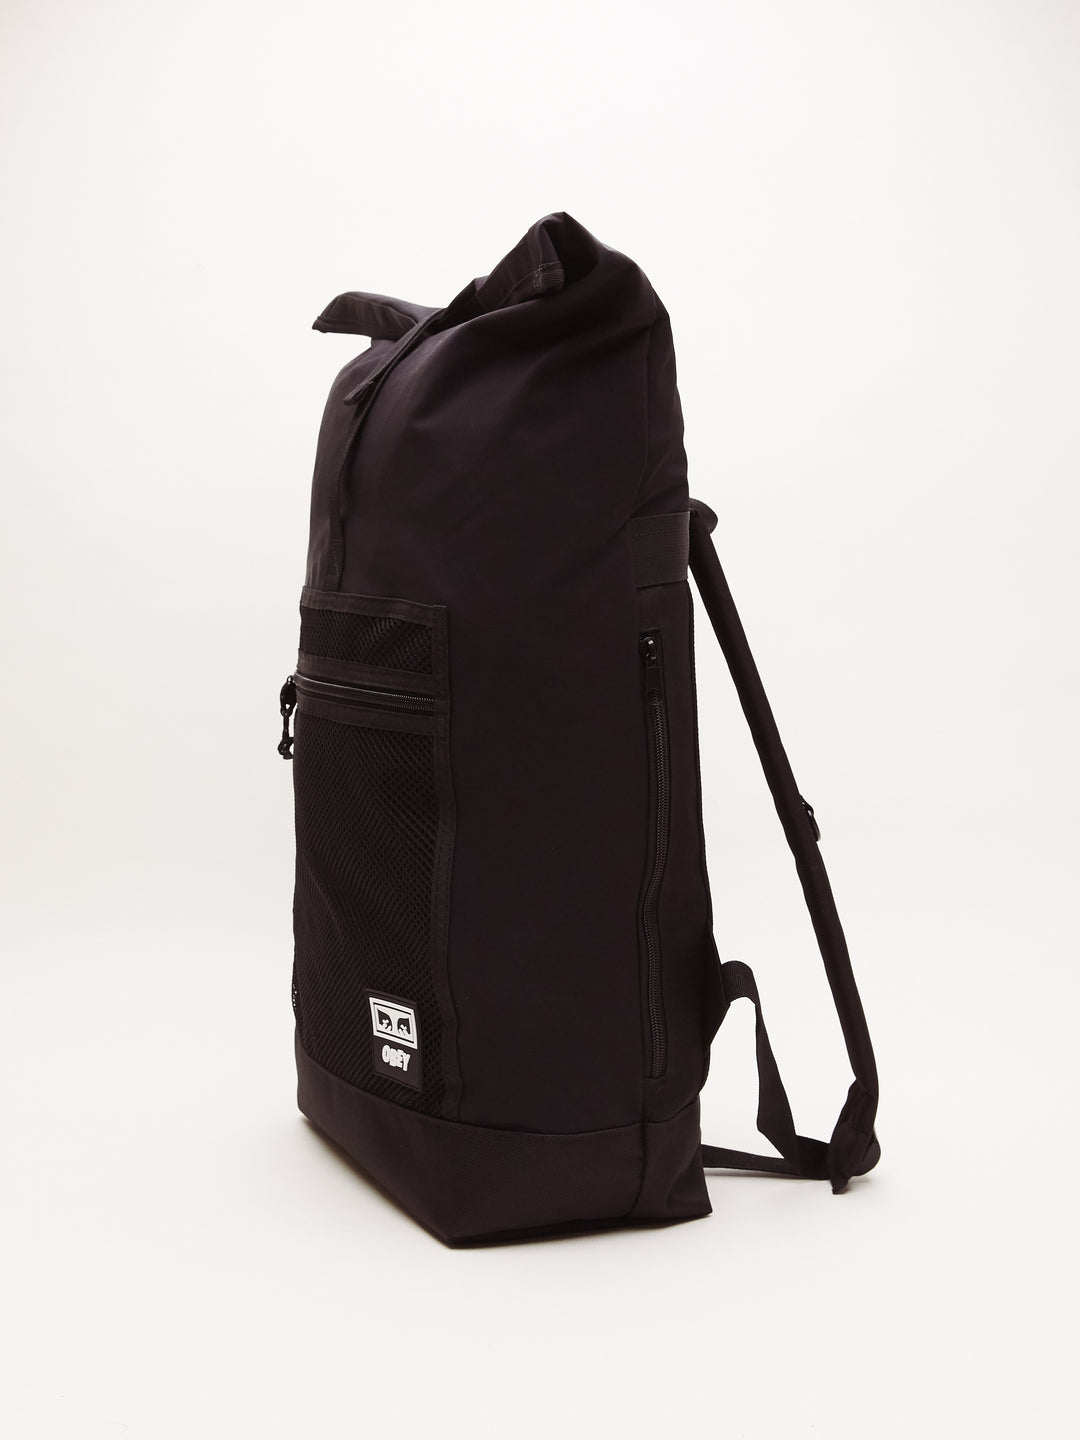 Conditions Rolltop Bag / Black - Main Image Number 2 of 3